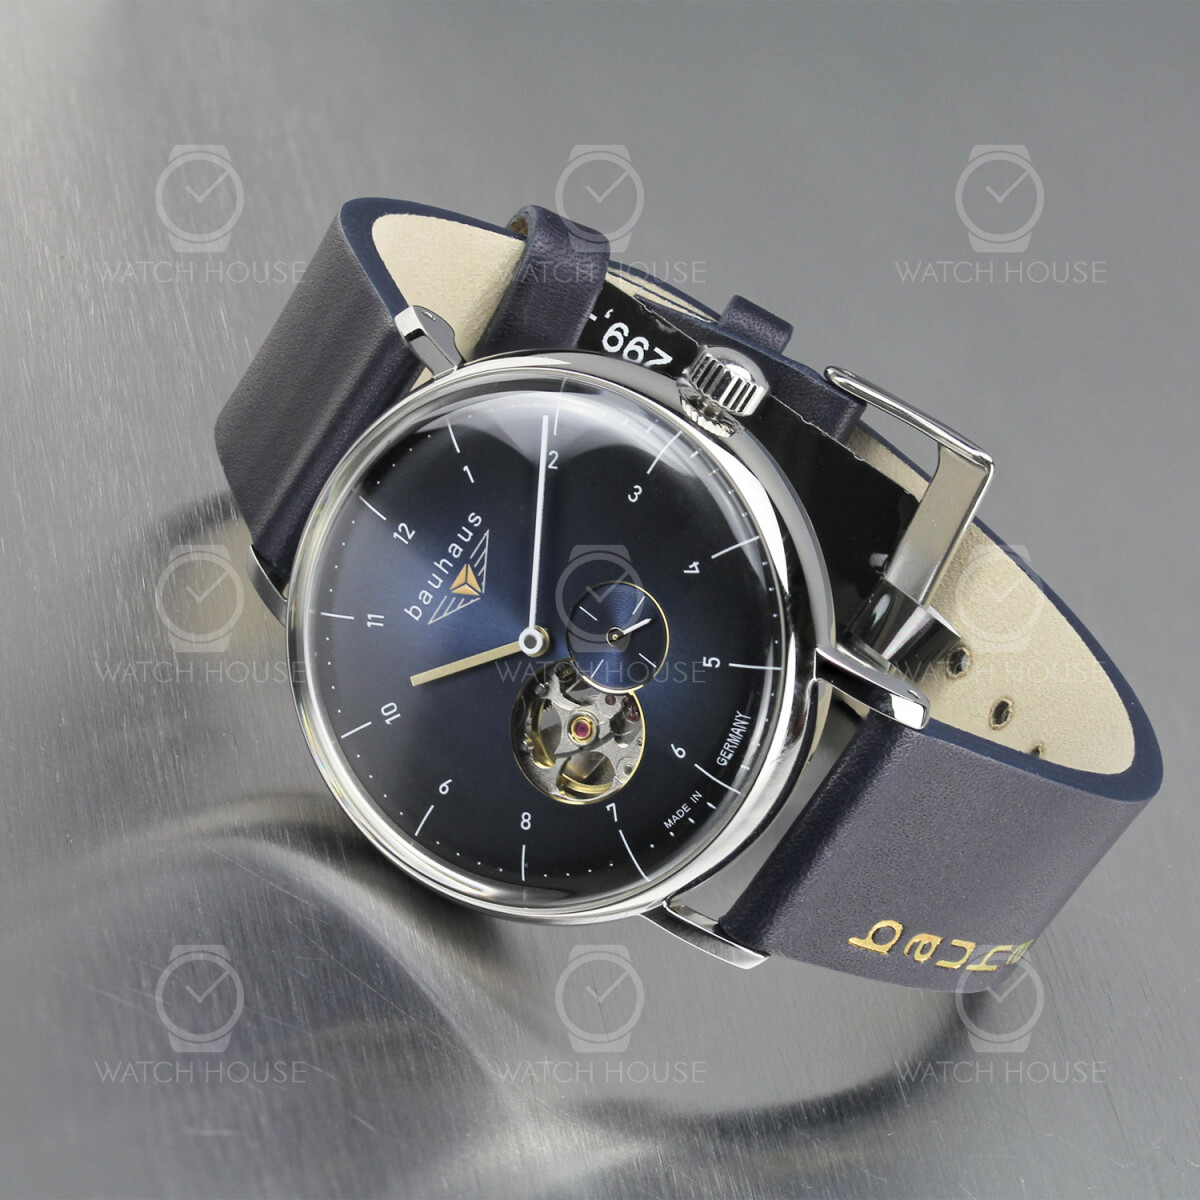 Bauhaus 2166-3 men automatic watch with open heart in...